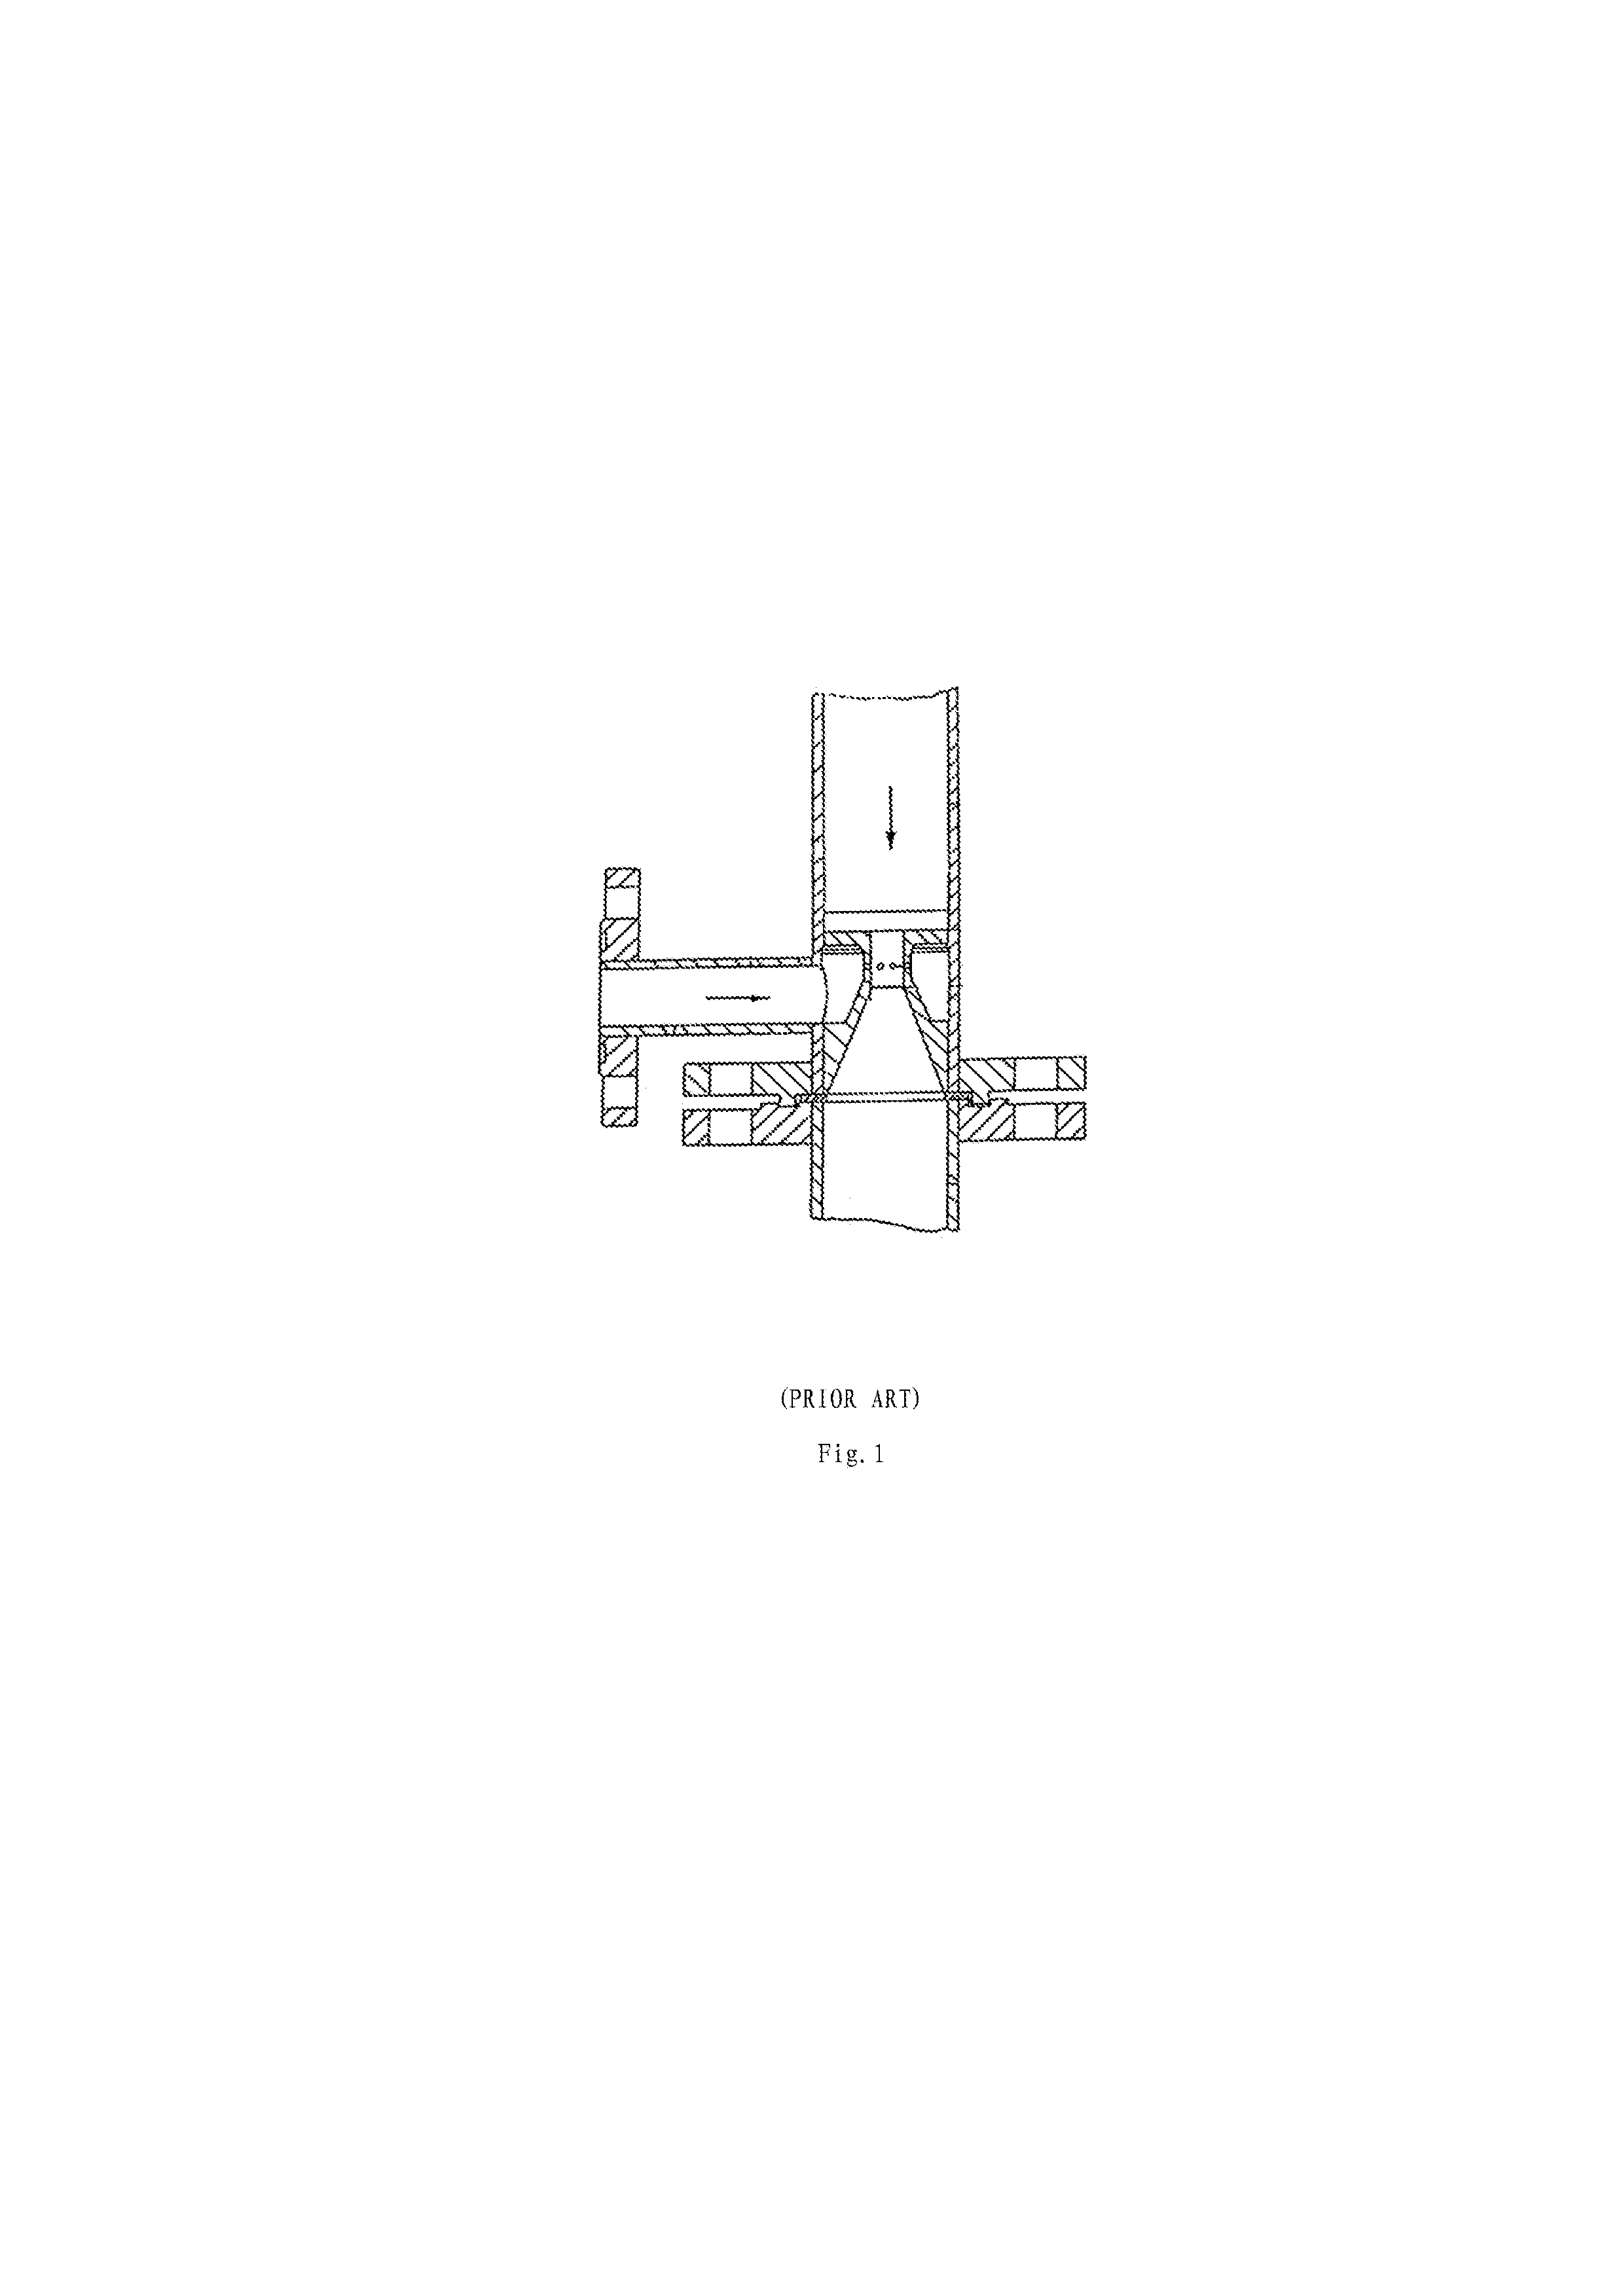 High-speed mixing reactor and application thereof